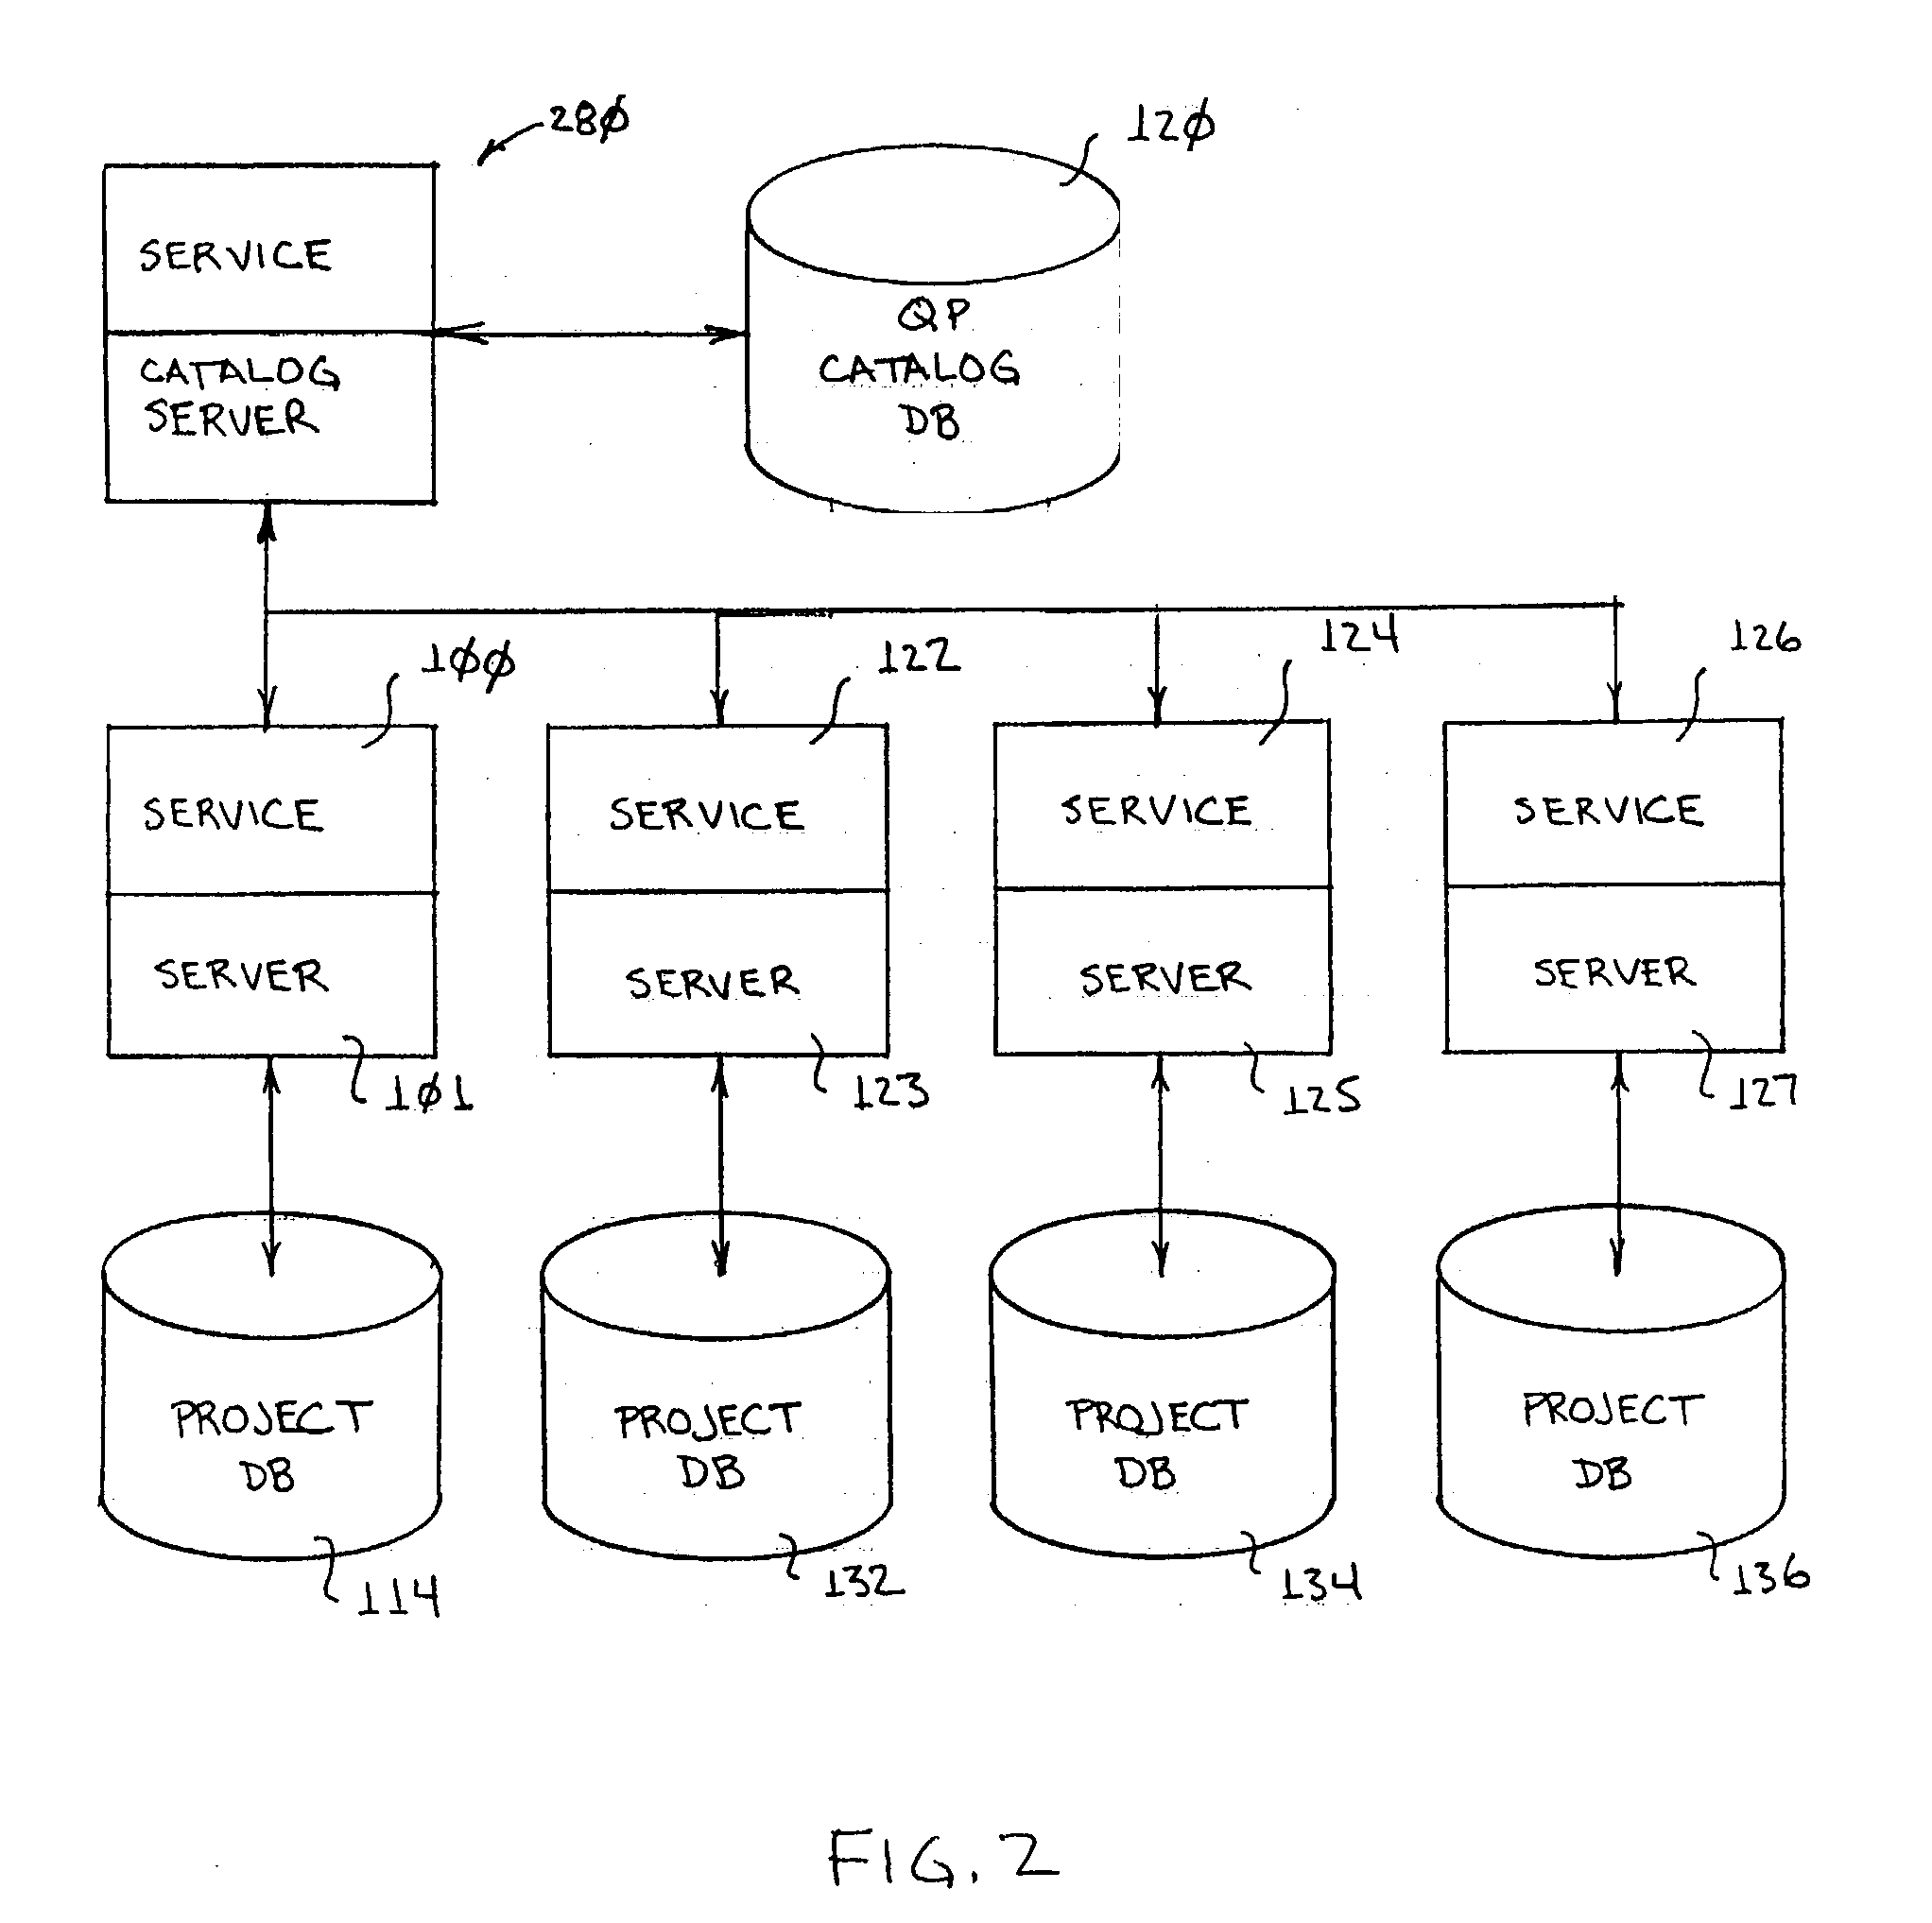 System and method for searching a plurality of databases distributed across a multi server domain